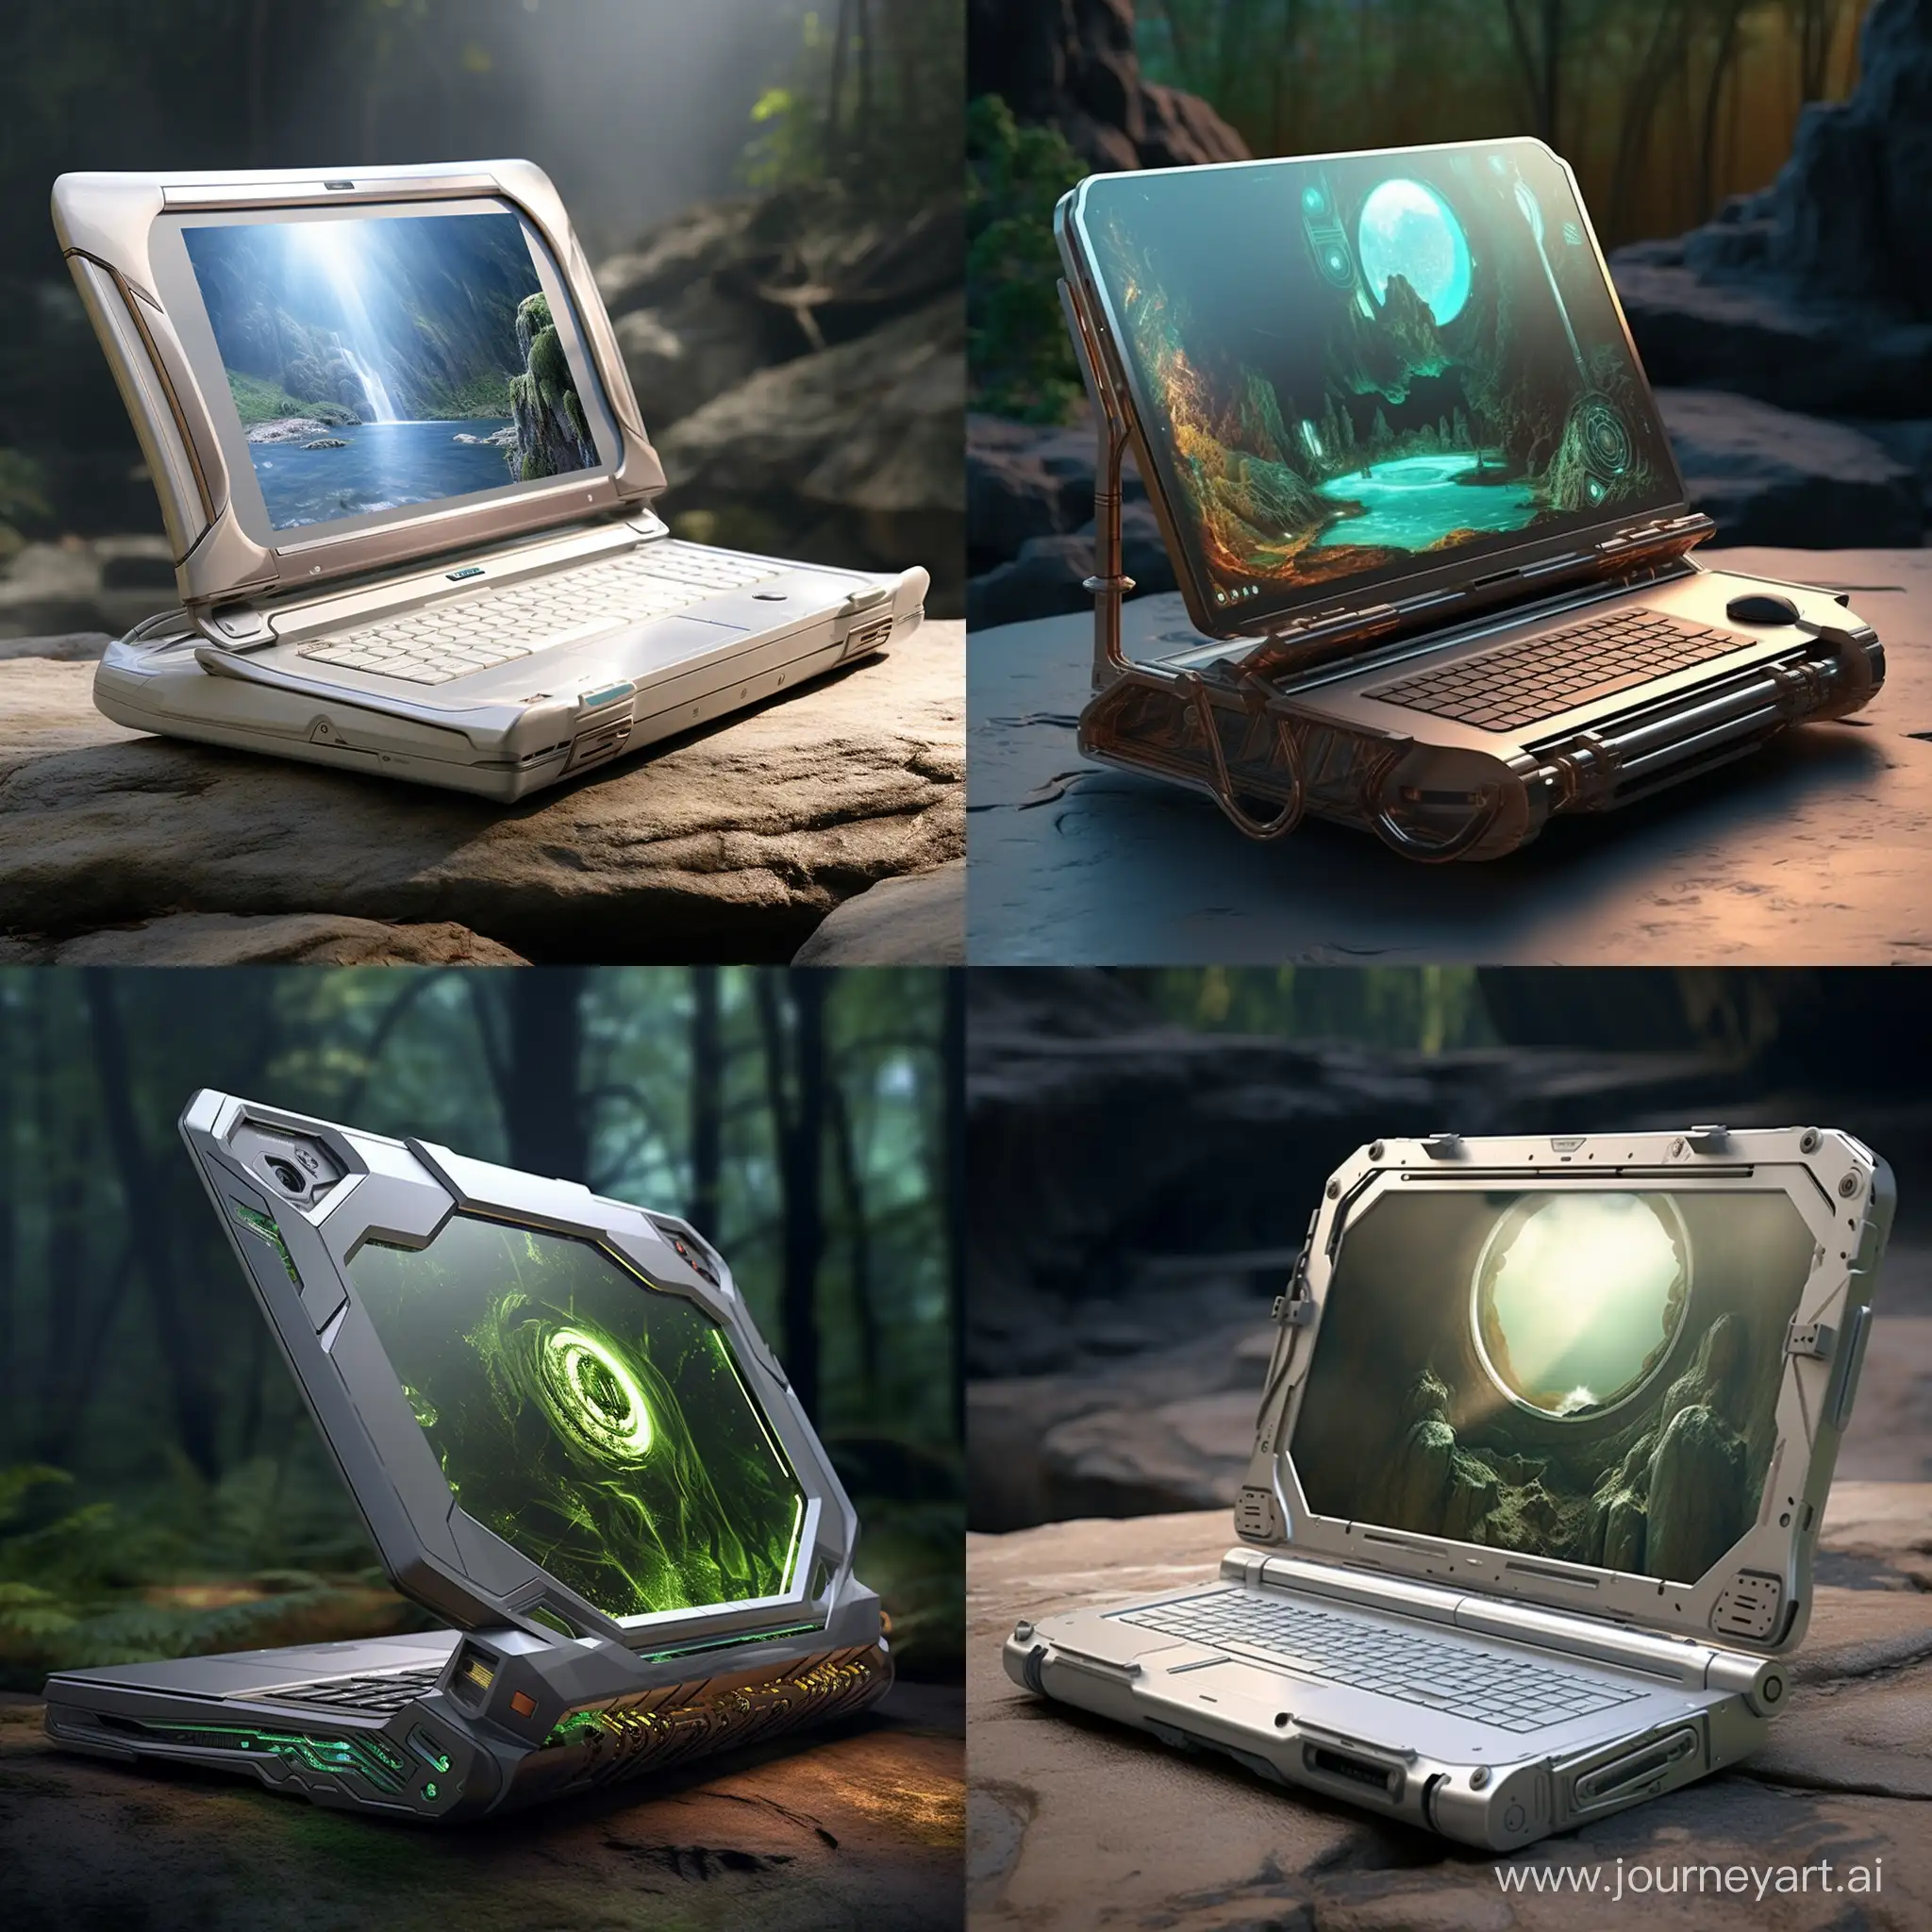 Futuristic-EcoFriendly-Laptop-in-Science-Fiction-Setting